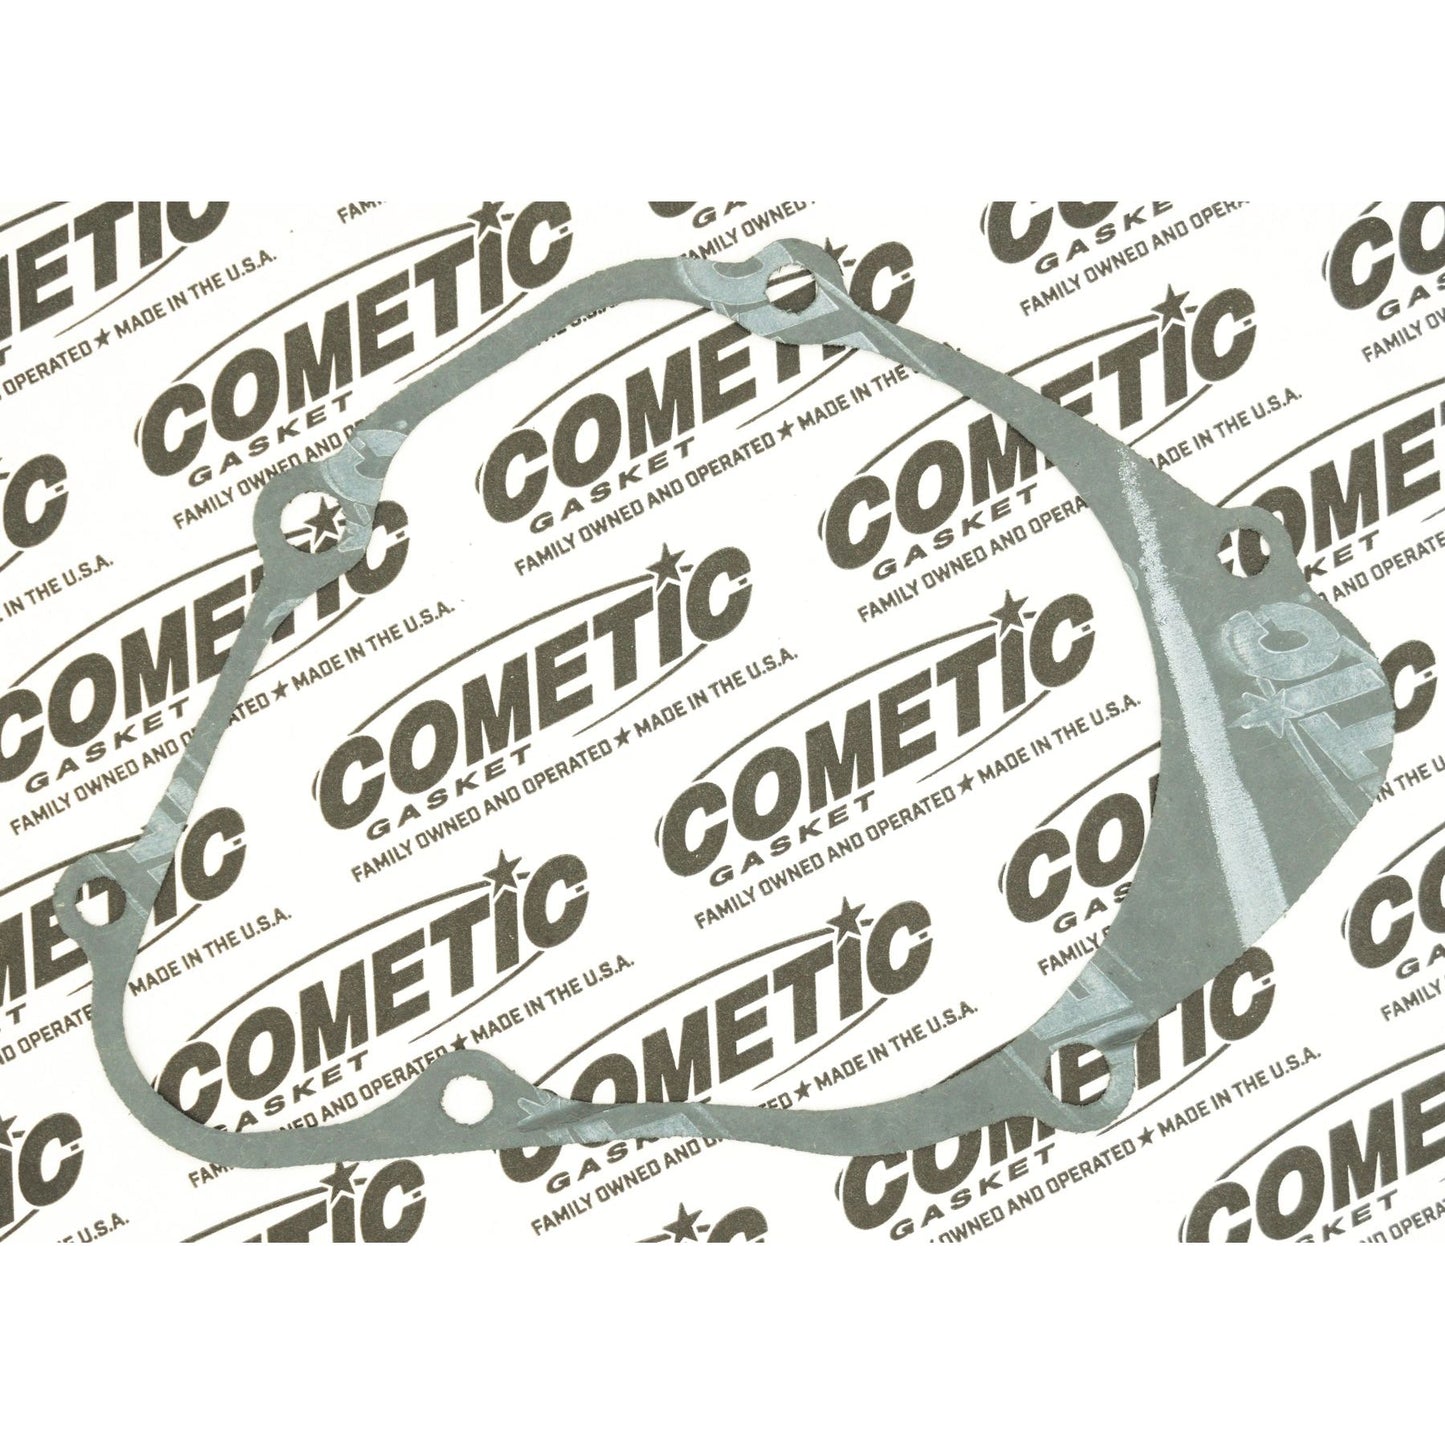 Honda CBX Left Side Cover Gasket - Cometic Made in USA